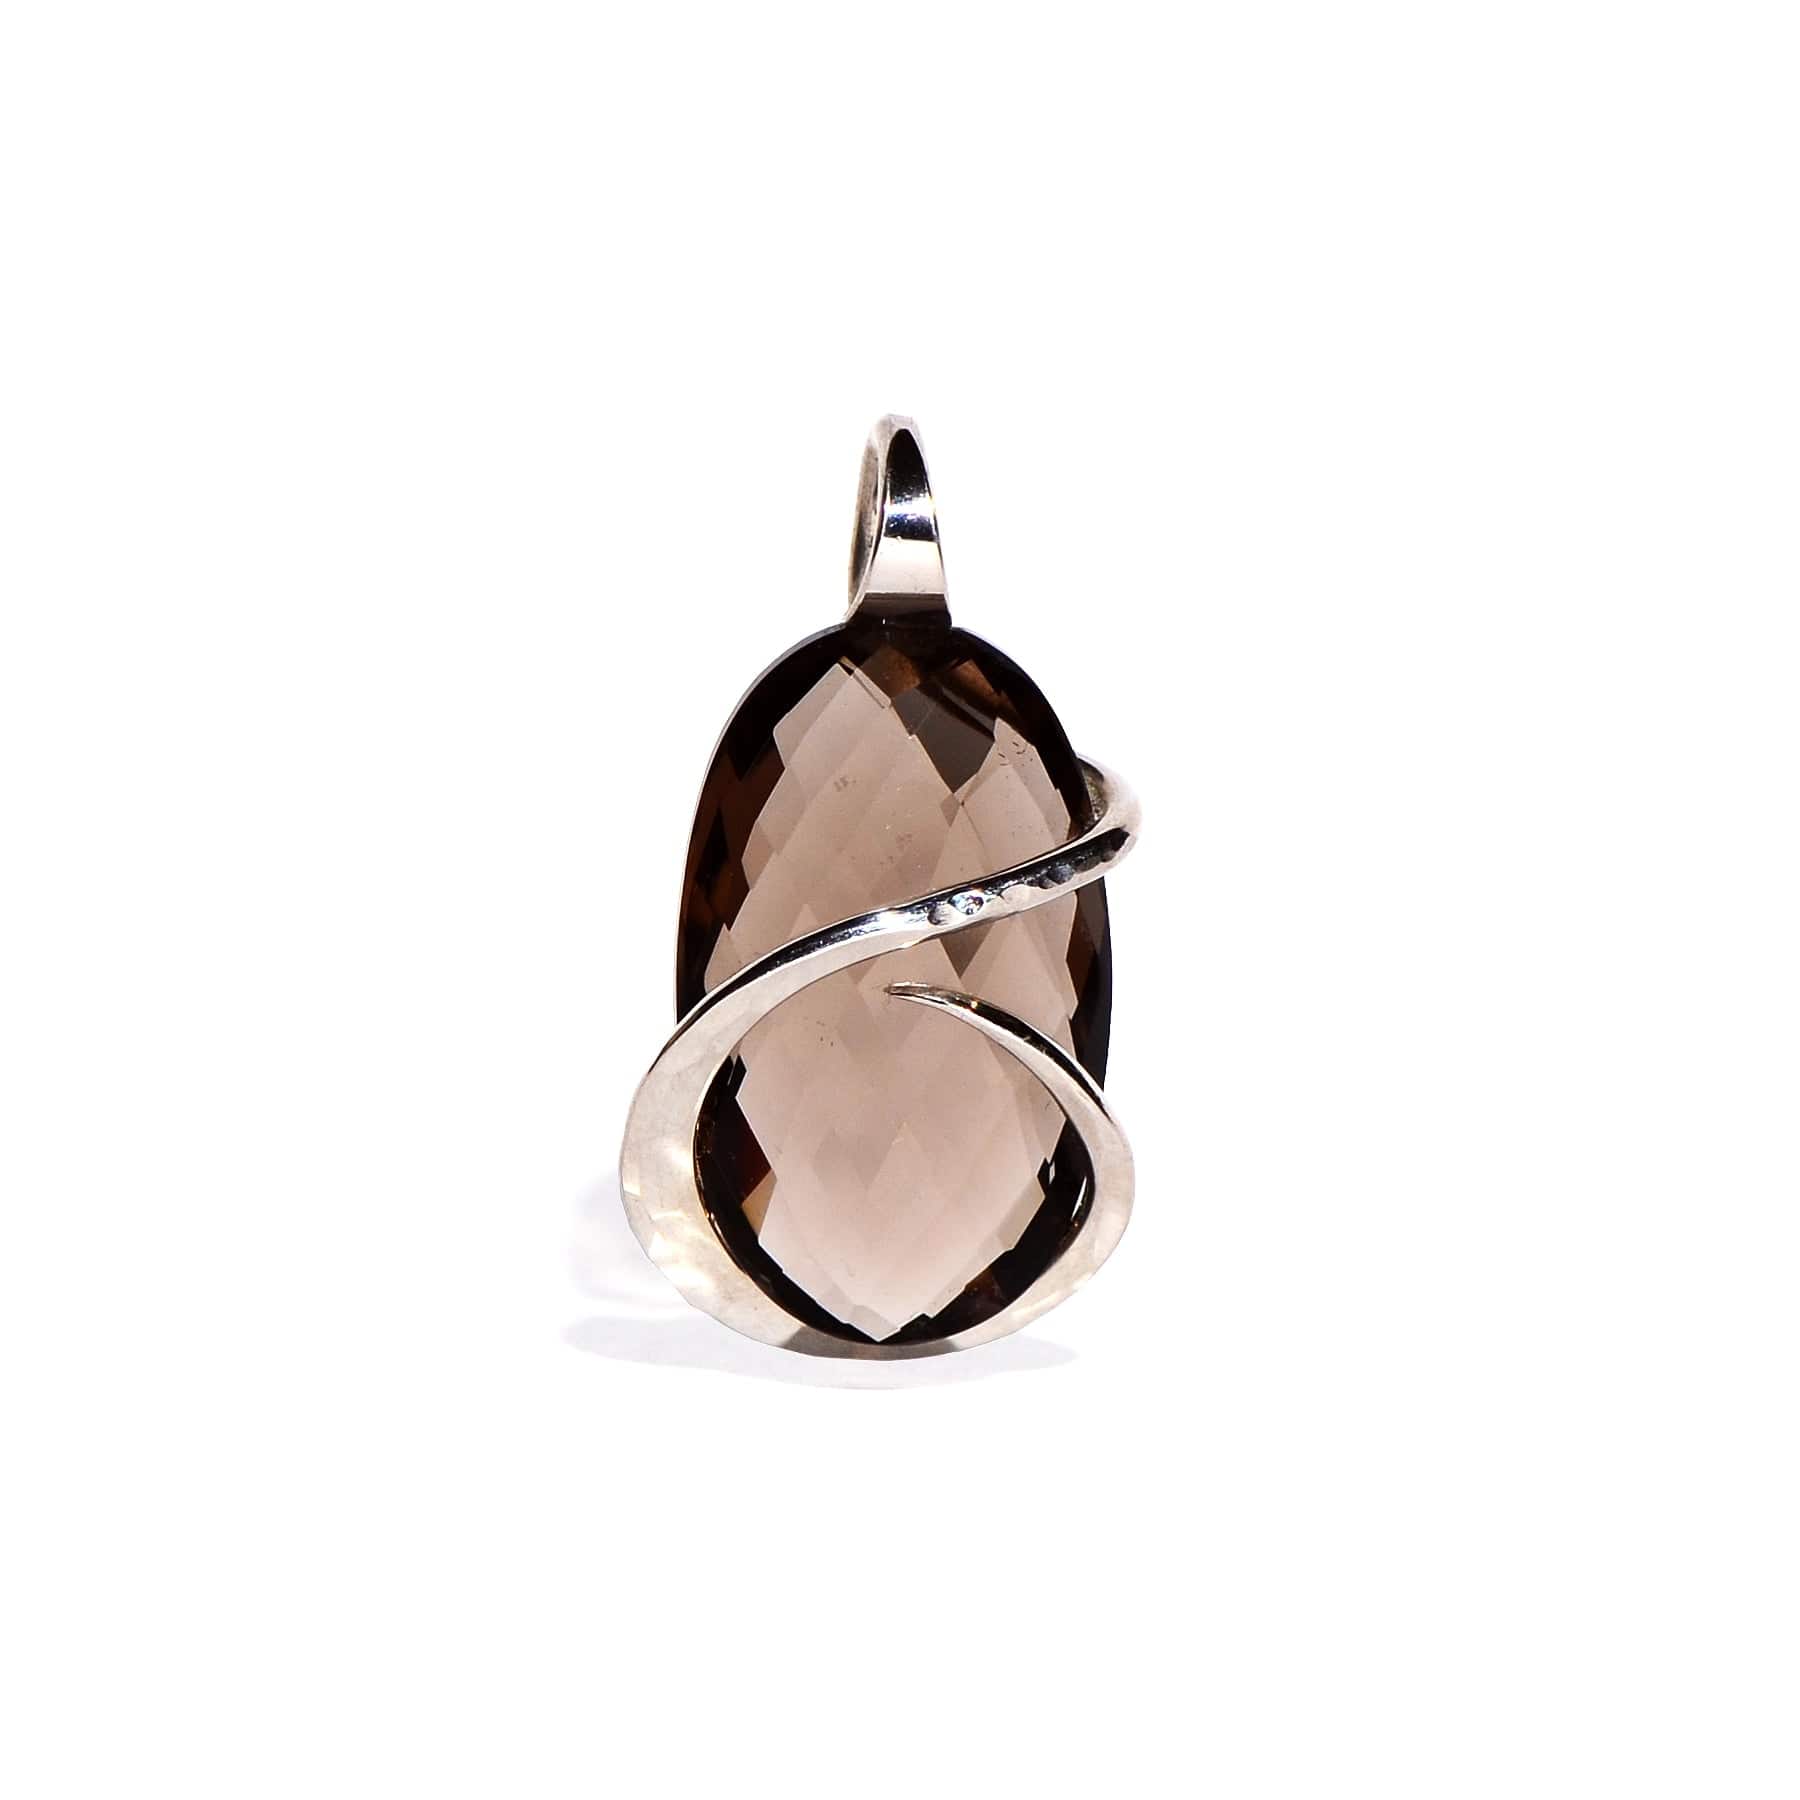 Smoky Quartz Faceted Sterling Silver Cranston Pendant - Oval Crystal